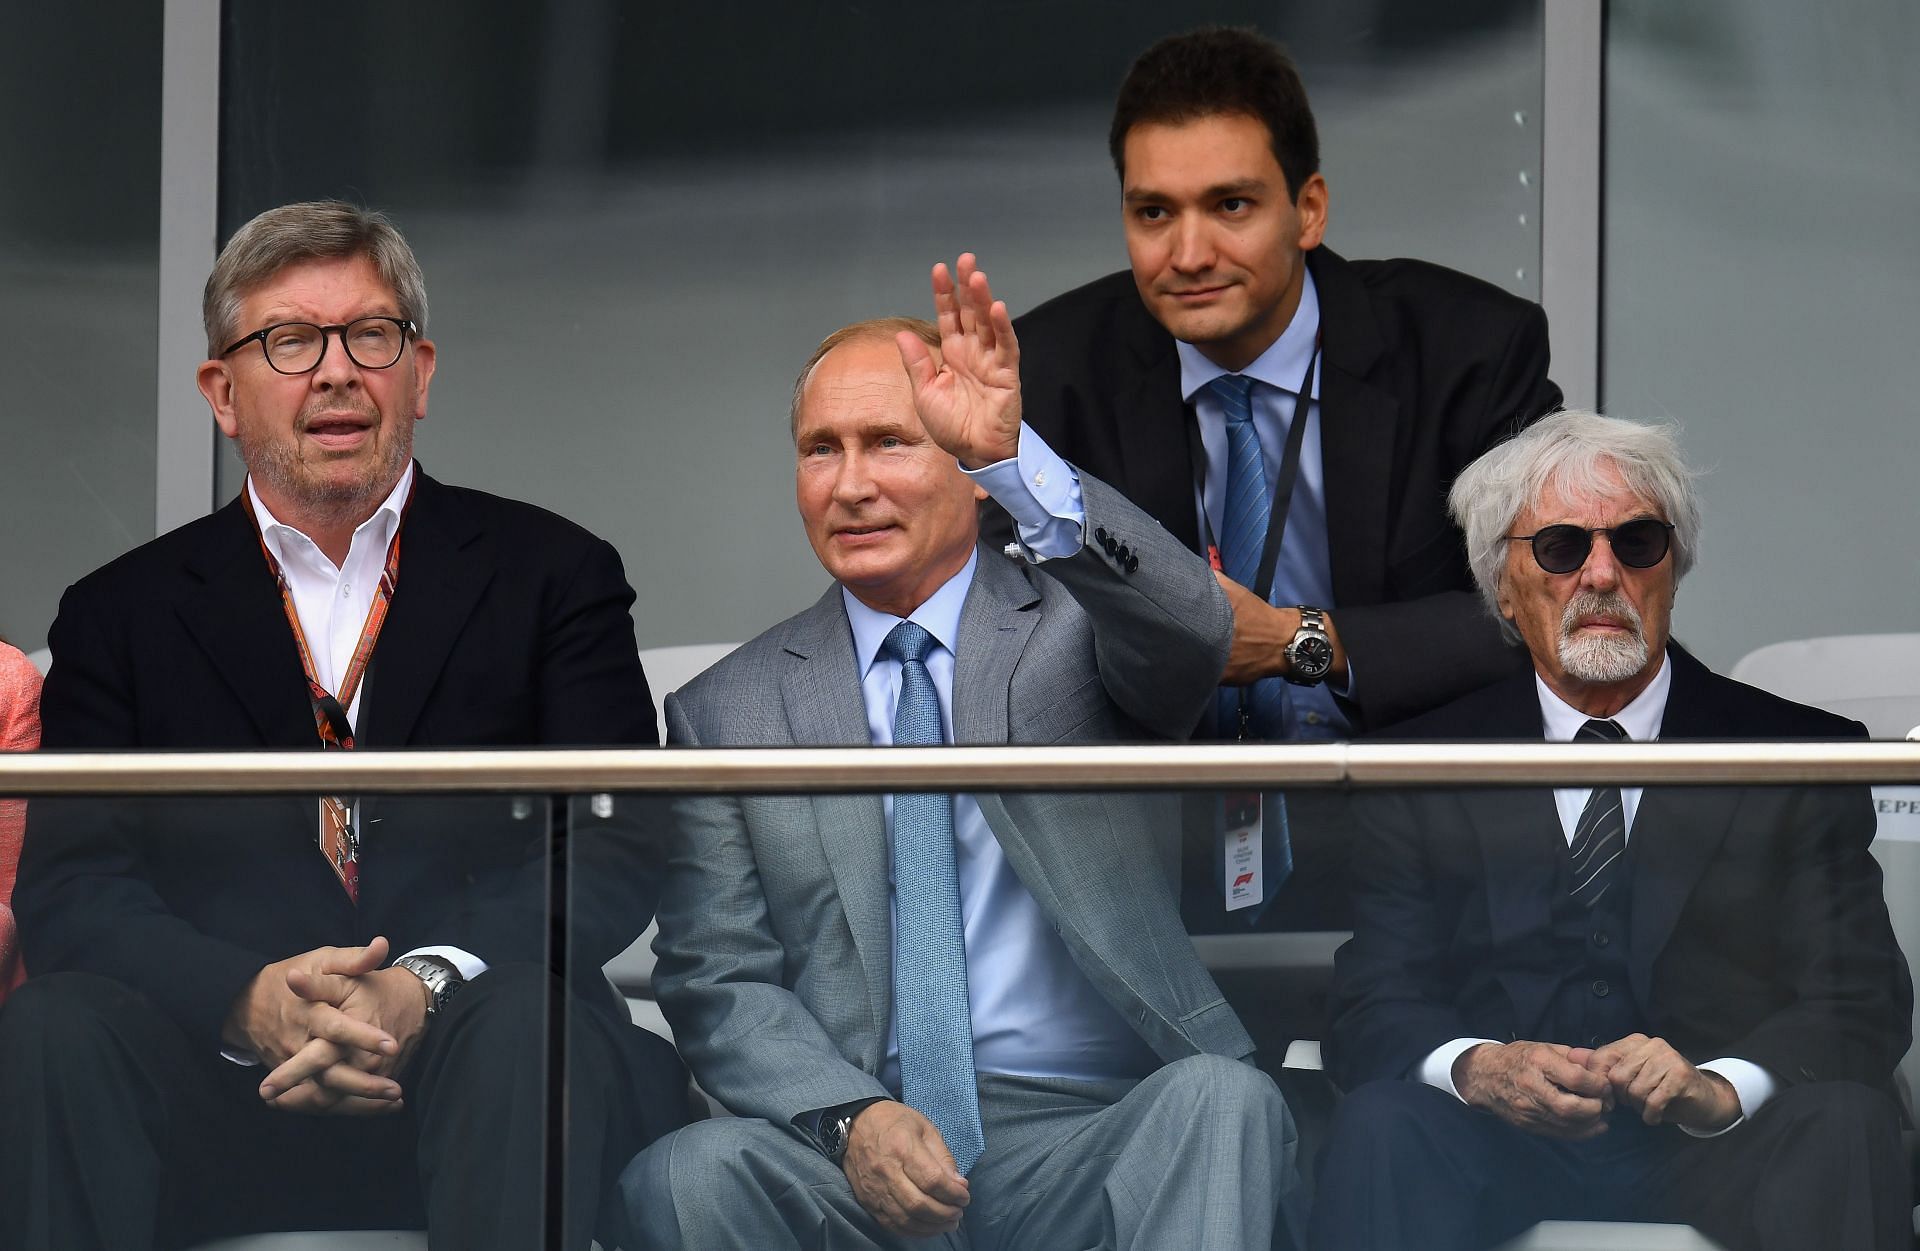 Ross Brawn (left), Russian President Vladimir Putin (center), and Bernie Ecclestone (right) during the 2018 Russian Grand Prix (Photo by Clive Mason/Getty Images)